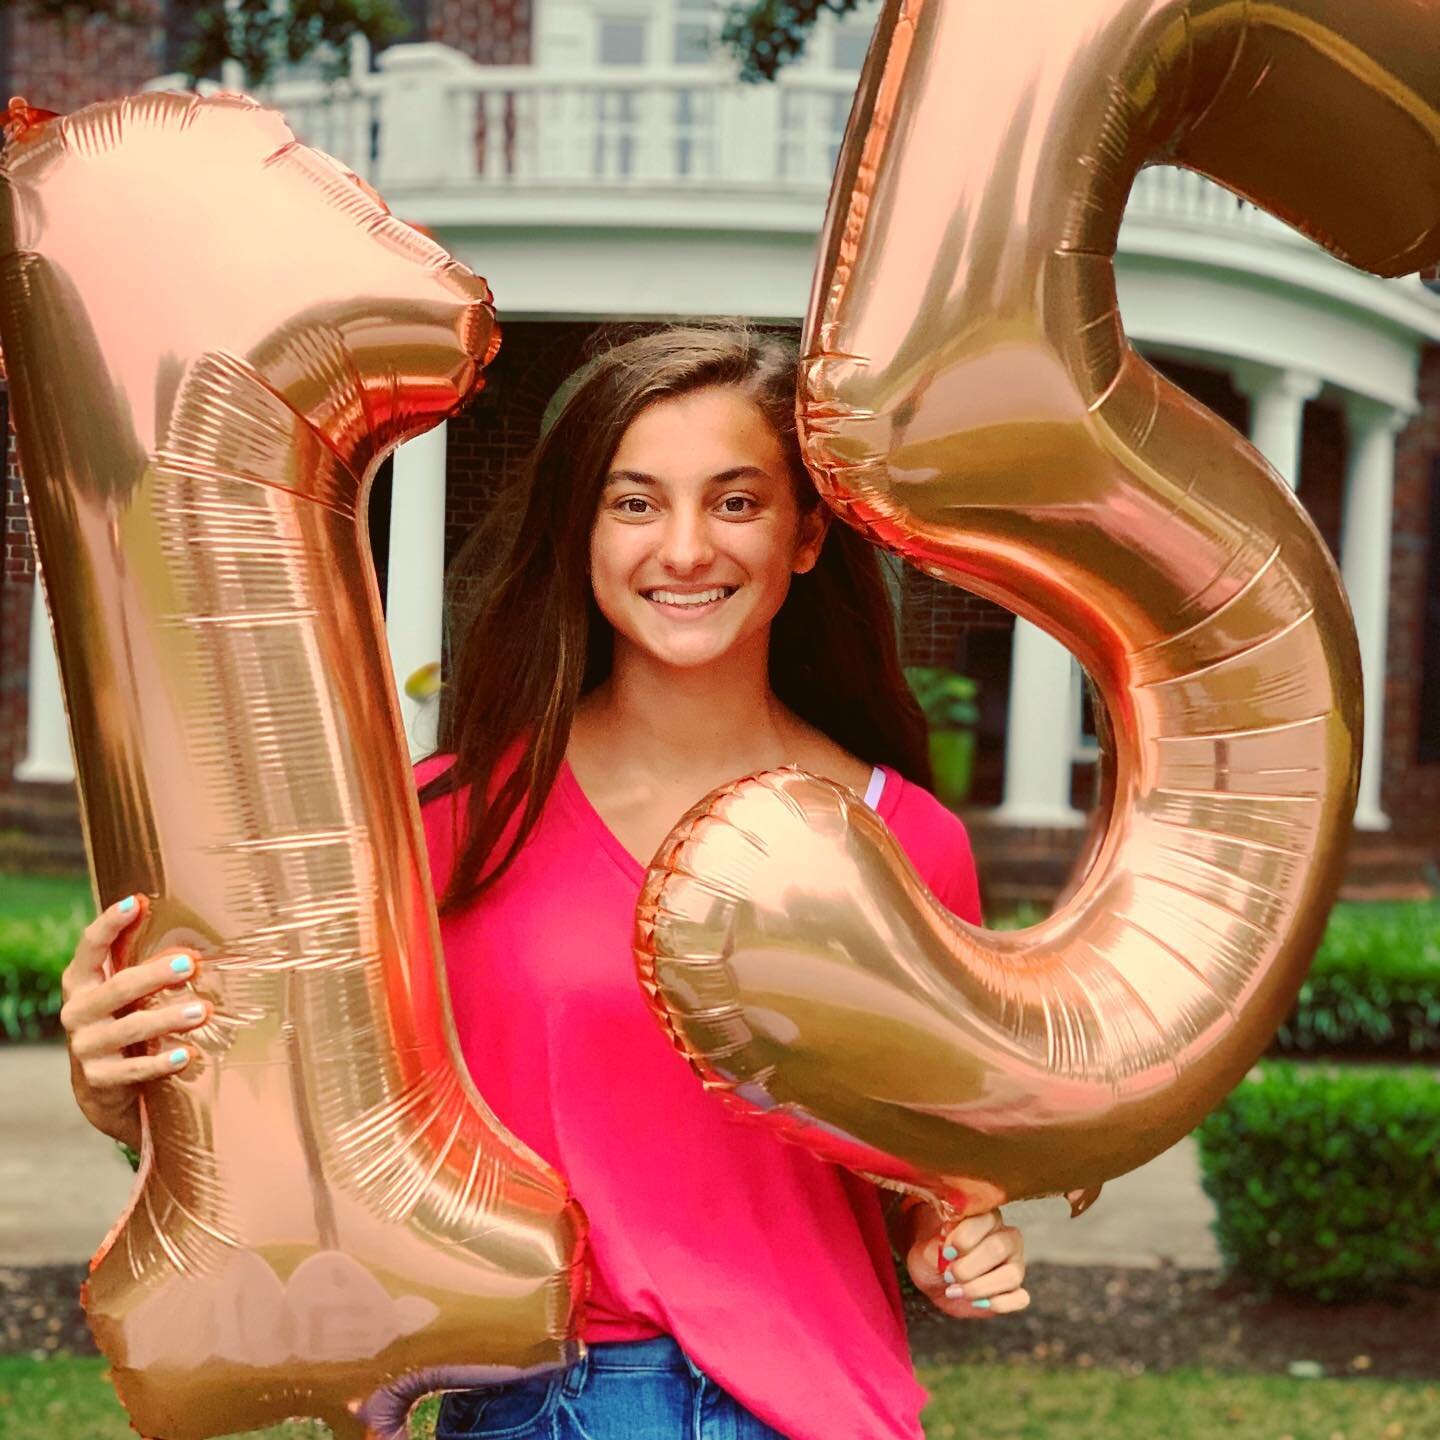 🎈𝔽 𝕀 𝔽 𝕋 𝔼 𝔼 ℕ !!🎈

My first born.
The one who made me a mama.
Is fifteen today. 🤯 

Sophie. You are sunshine, Grace,a peace maker and a servant at heart. You shine SO brightly and are truly beautiful inside and out.  I&rsquo;m in awe of how